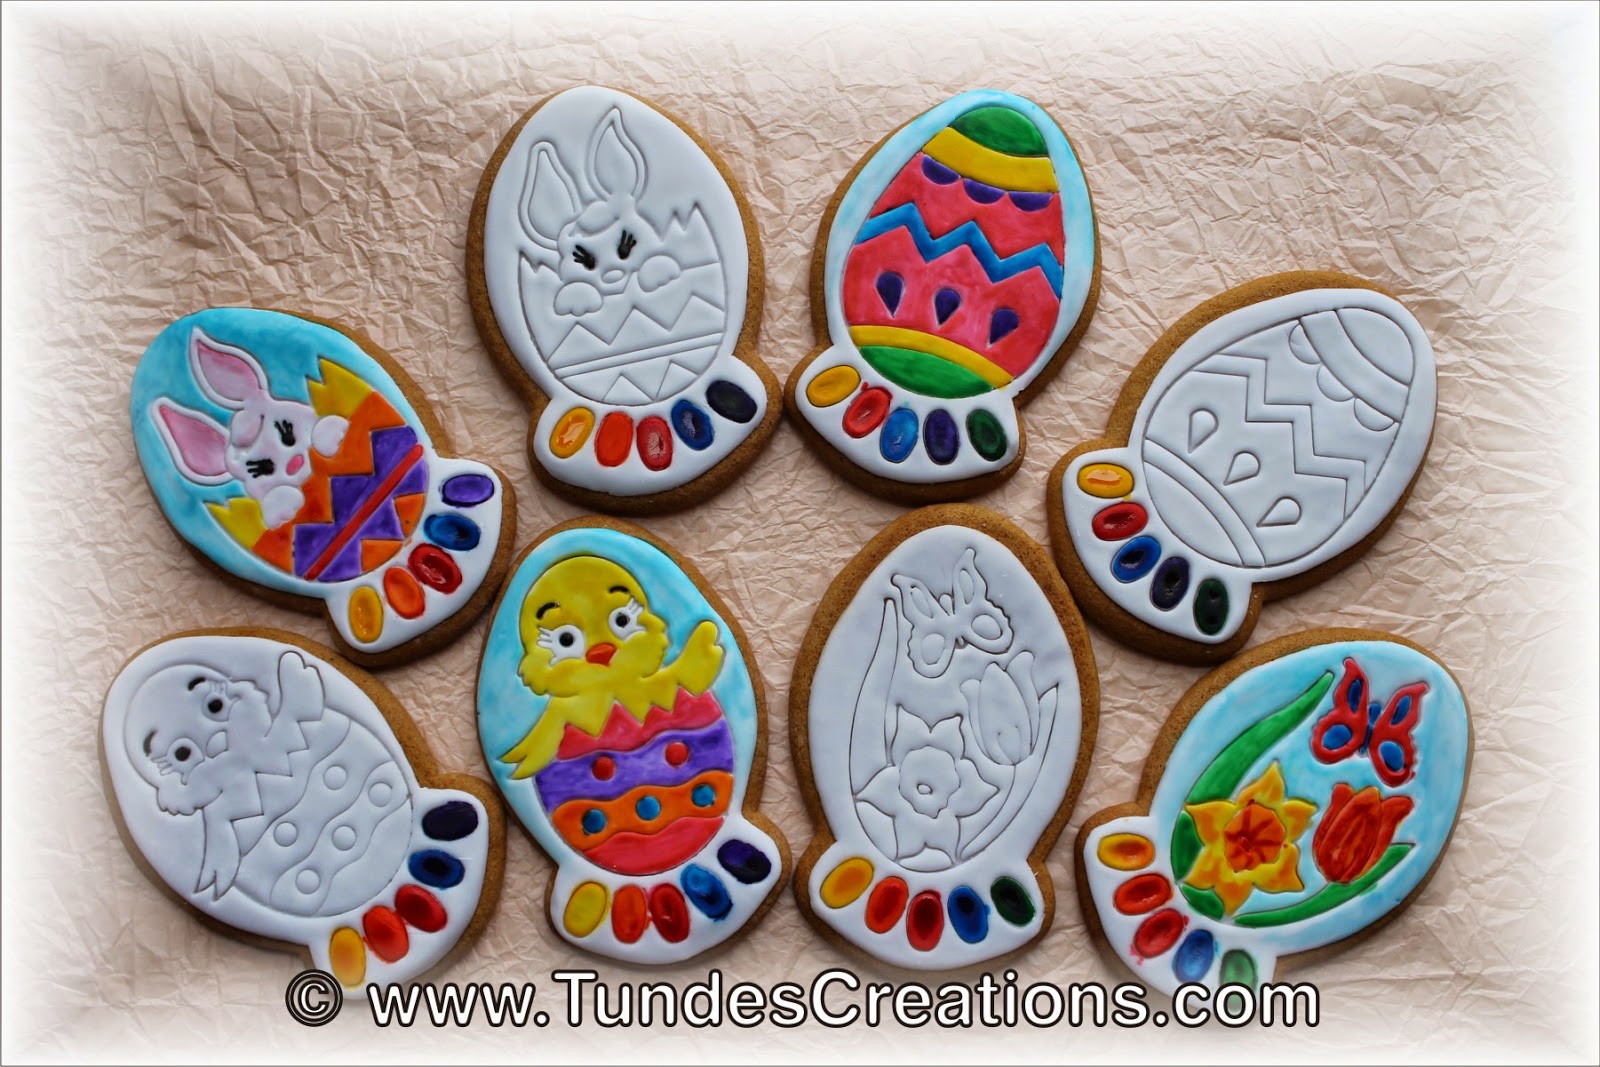 Paint your own Easter cookies